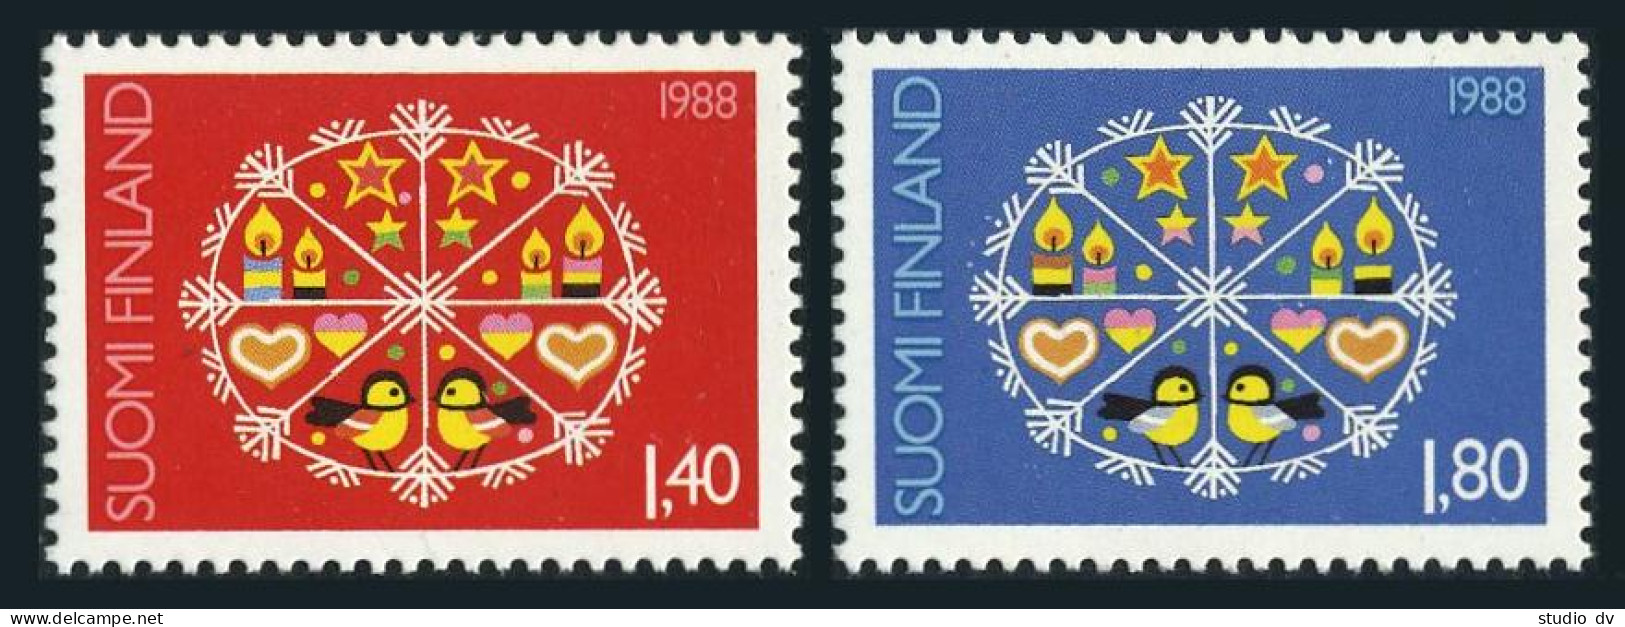 Finland 783-784,MNH.Michel 1066-1067. Christmas 1988,snowflakes. - Unused Stamps